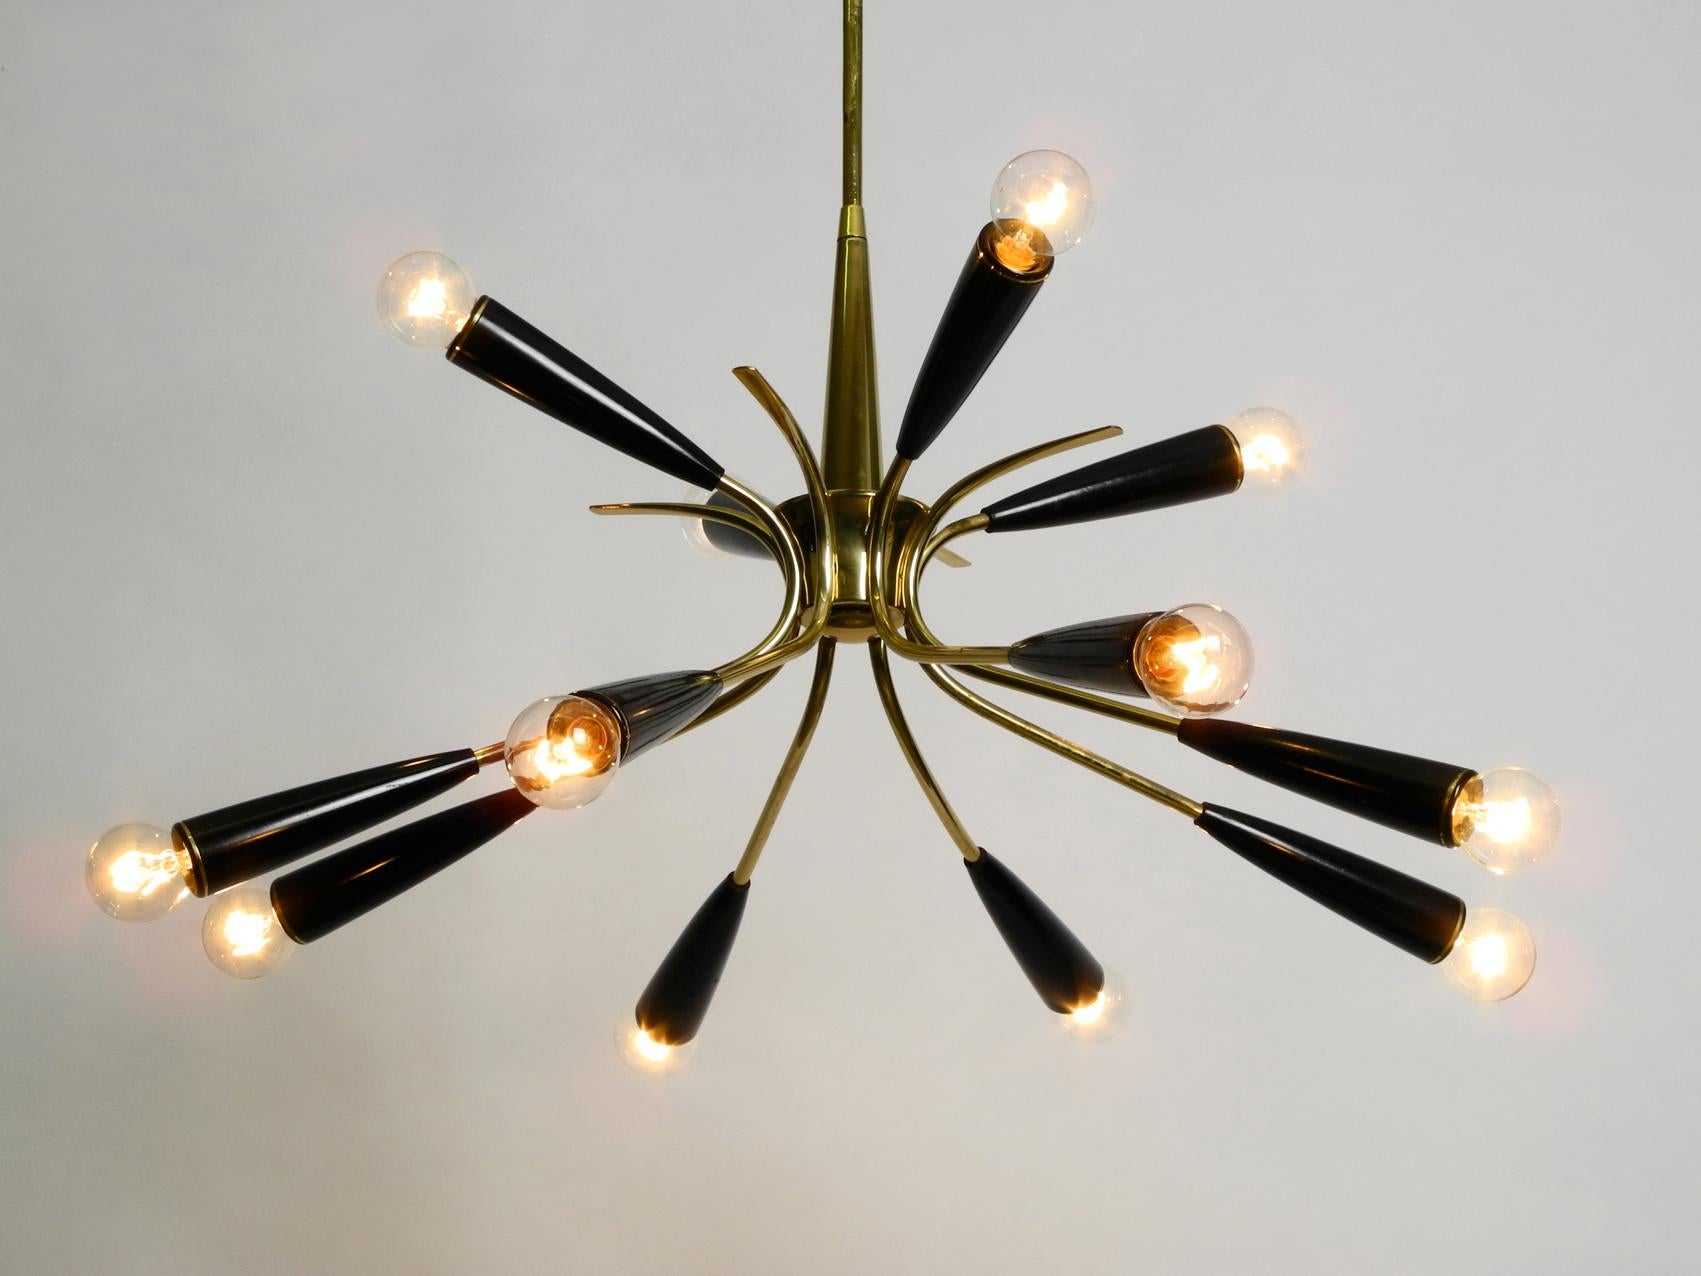 Very rare Mid-Century Modernist Sputnik brass ceiling lamp with cones made of bakalite.
Very nice 1950s Classic. Atomic design in good condition with great patina.
Twelve E14 sockets. Eight arms directed down and four up. Brass frame, bakalite